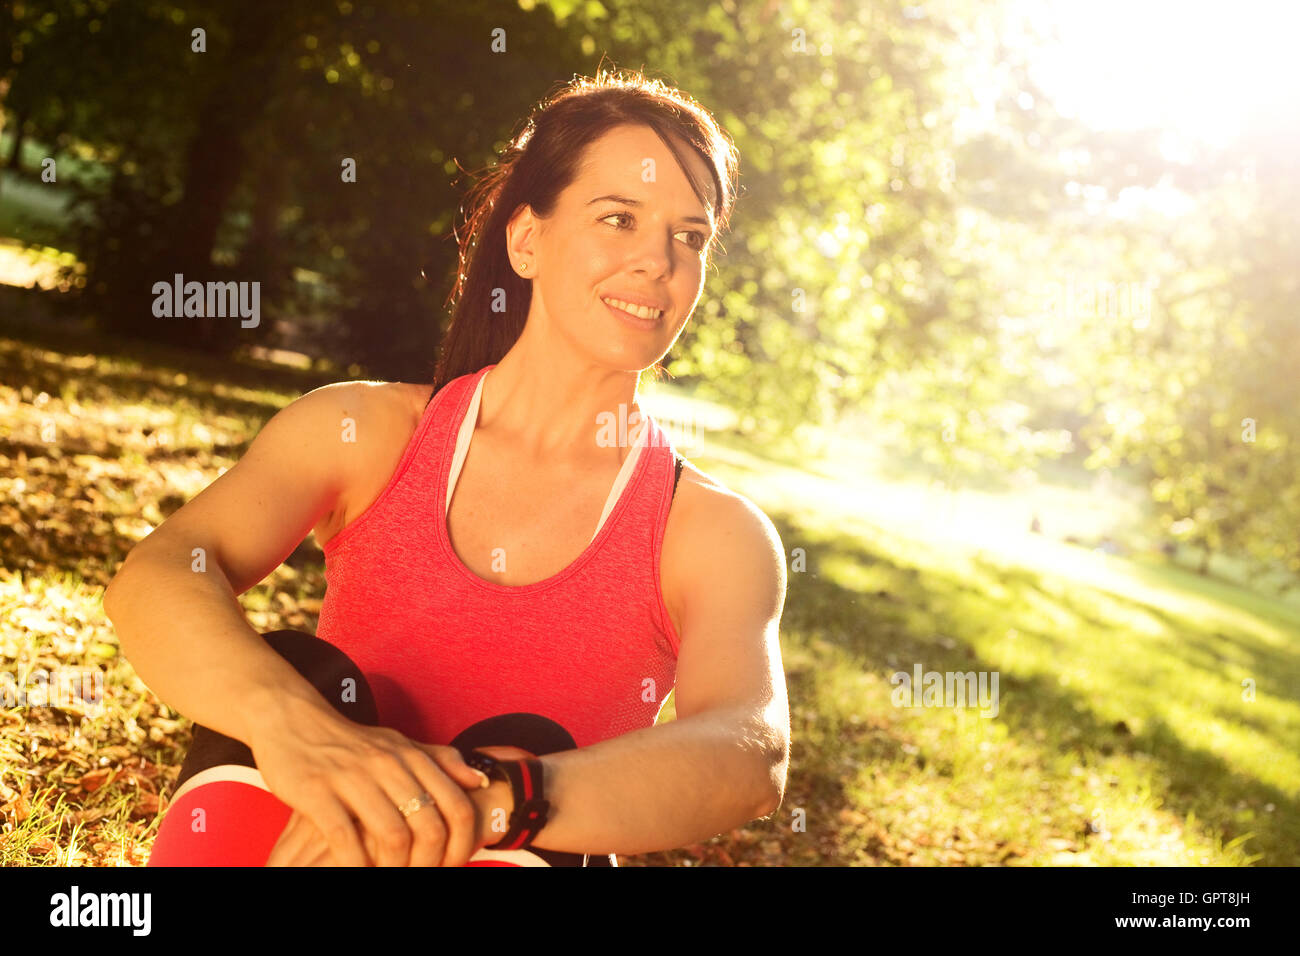 young woman sitting in the park after exercise Stock Photo